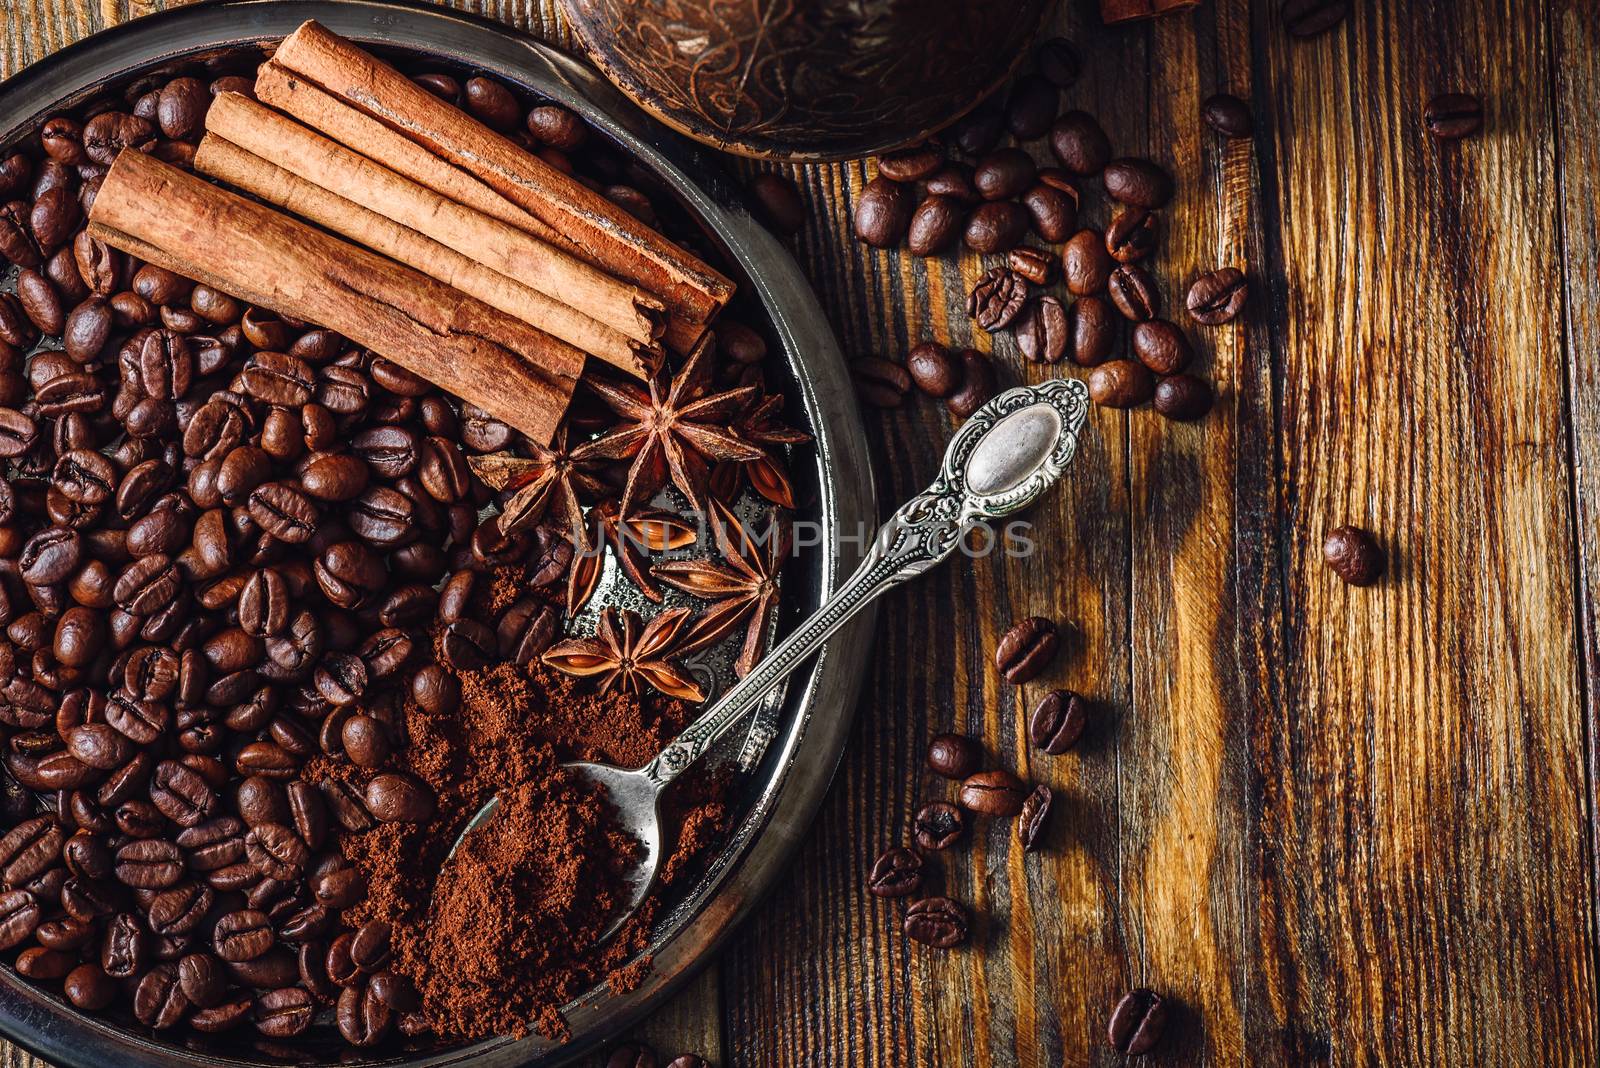 Coffee Beans with Spooonful of Ground Coffee, Cinnamon Sticks and Chinese Star Anise on Metal Plate. Some Beans Scattered on Wooden Table. View from Above.